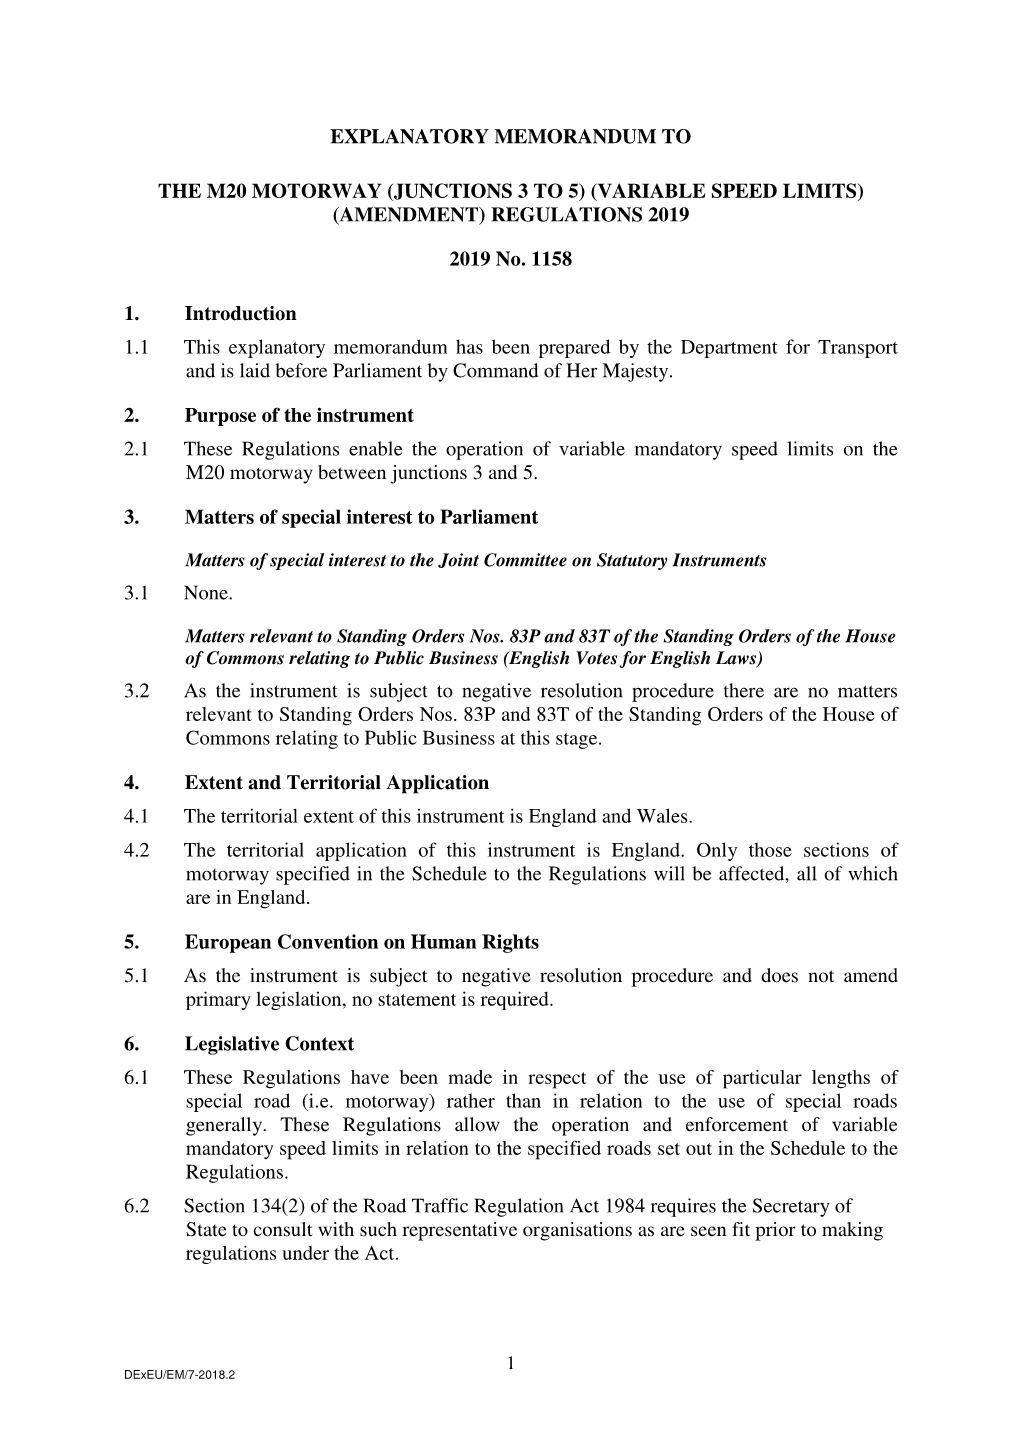 The M20 Motorway (Junctions 3 to 5) (Variable Speed Limits) (Amendment) Regulations 2019